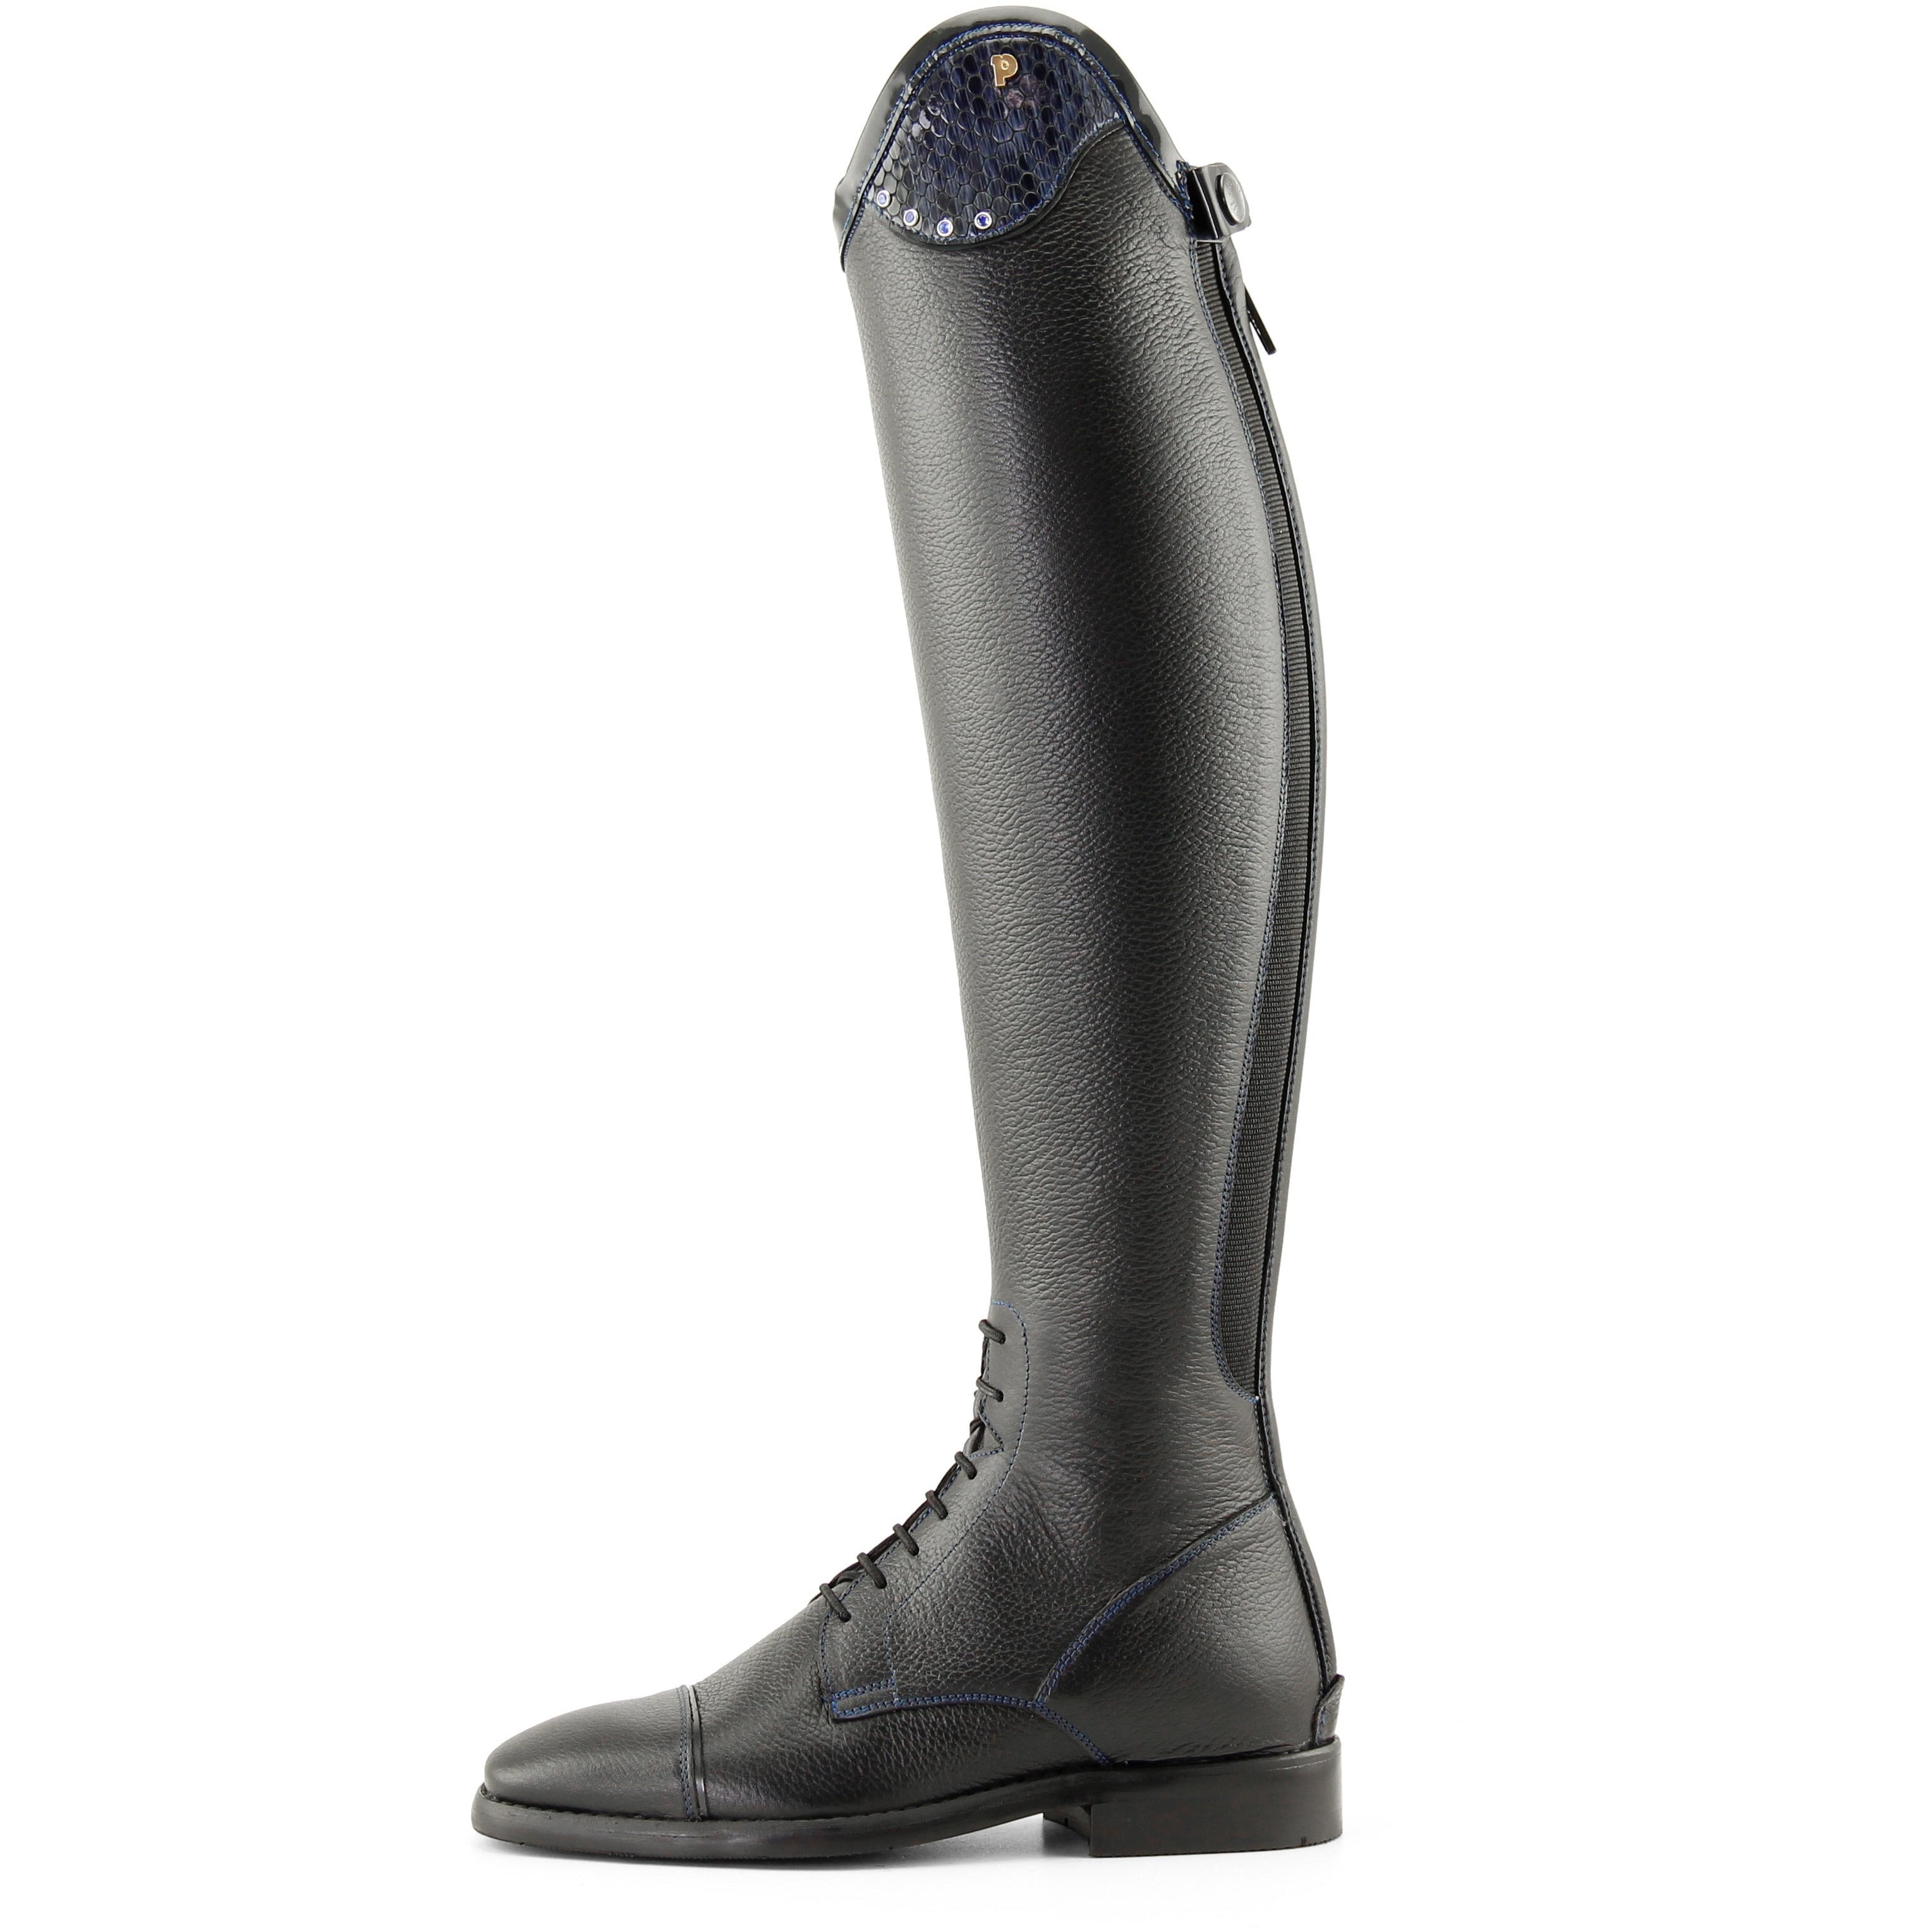 Petrie Luca Boot - Navy - we have some stock but most sizes are to order